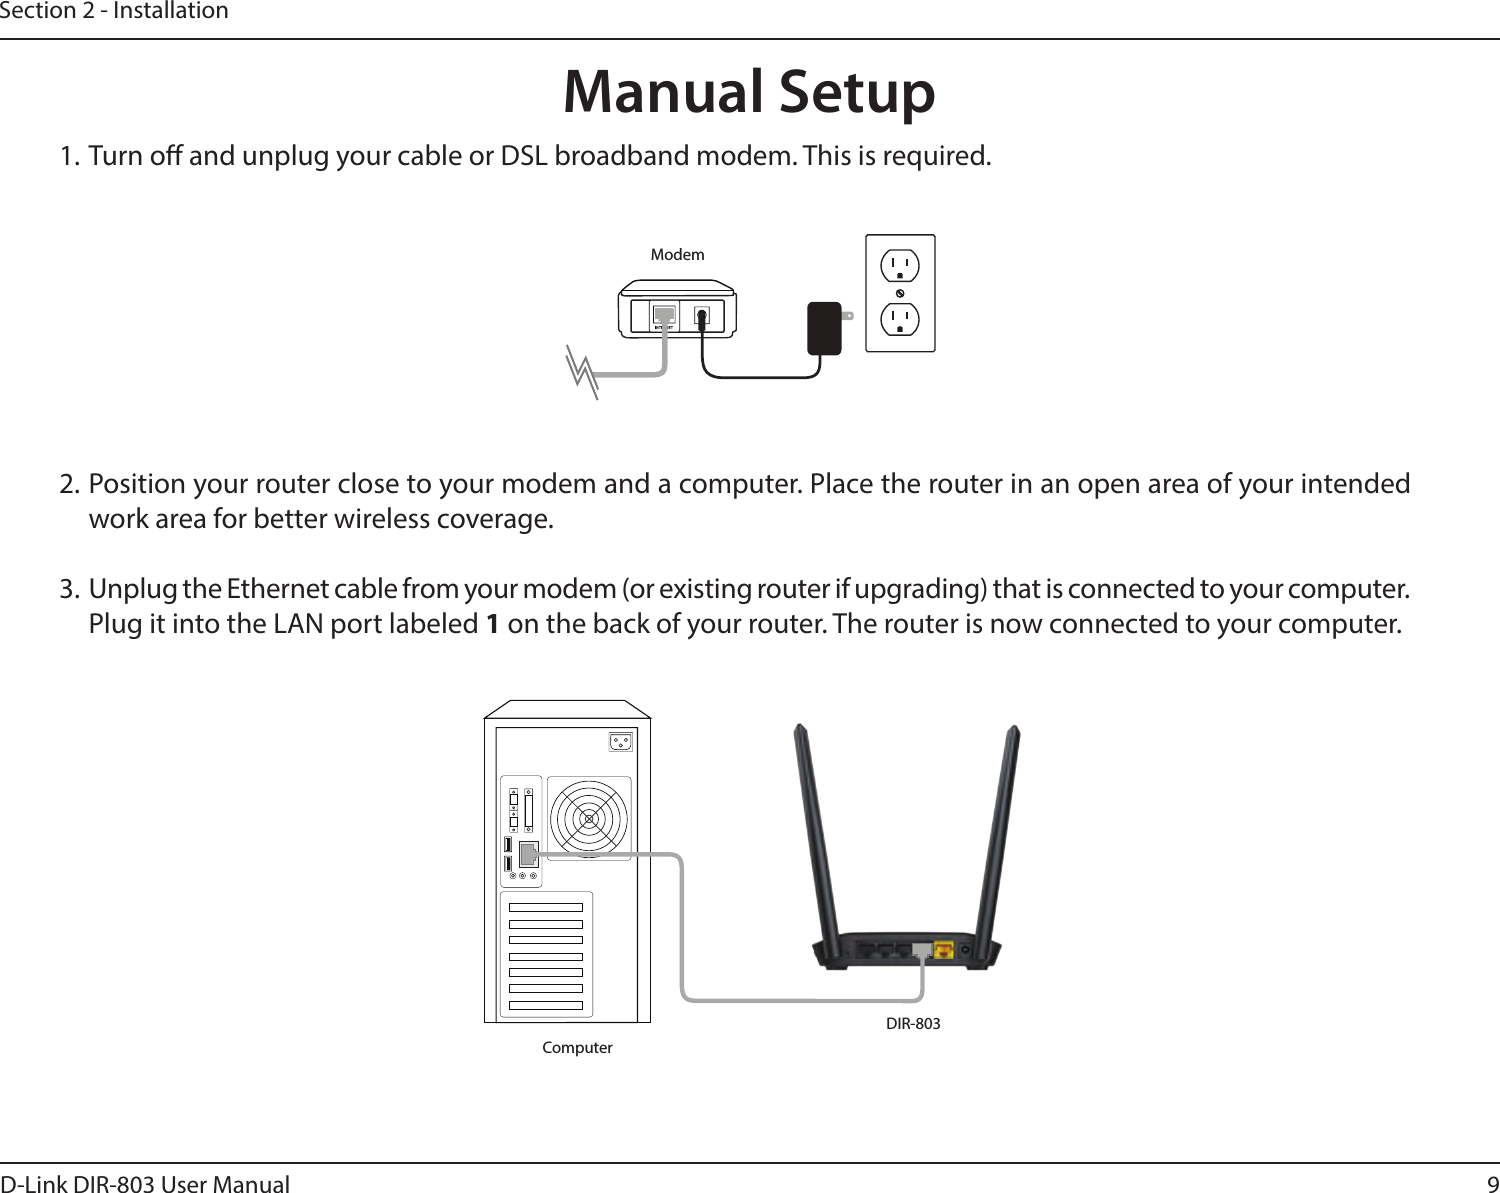 9D-Link DIR-803 User ManualSection 2 - Installation1. Turn o and unplug your cable or DSL broadband modem. This is required.Manual Setup2. Position your router close to your modem and a computer. Place the router in an open area of your intended work area for better wireless coverage.3.  Unplug the Ethernet cable from your modem (or existing router if upgrading) that is connected to your computer. Plug it into the LAN port labeled 1 on the back of your router. The router is now connected to your computer.ModemDIR-803Computer